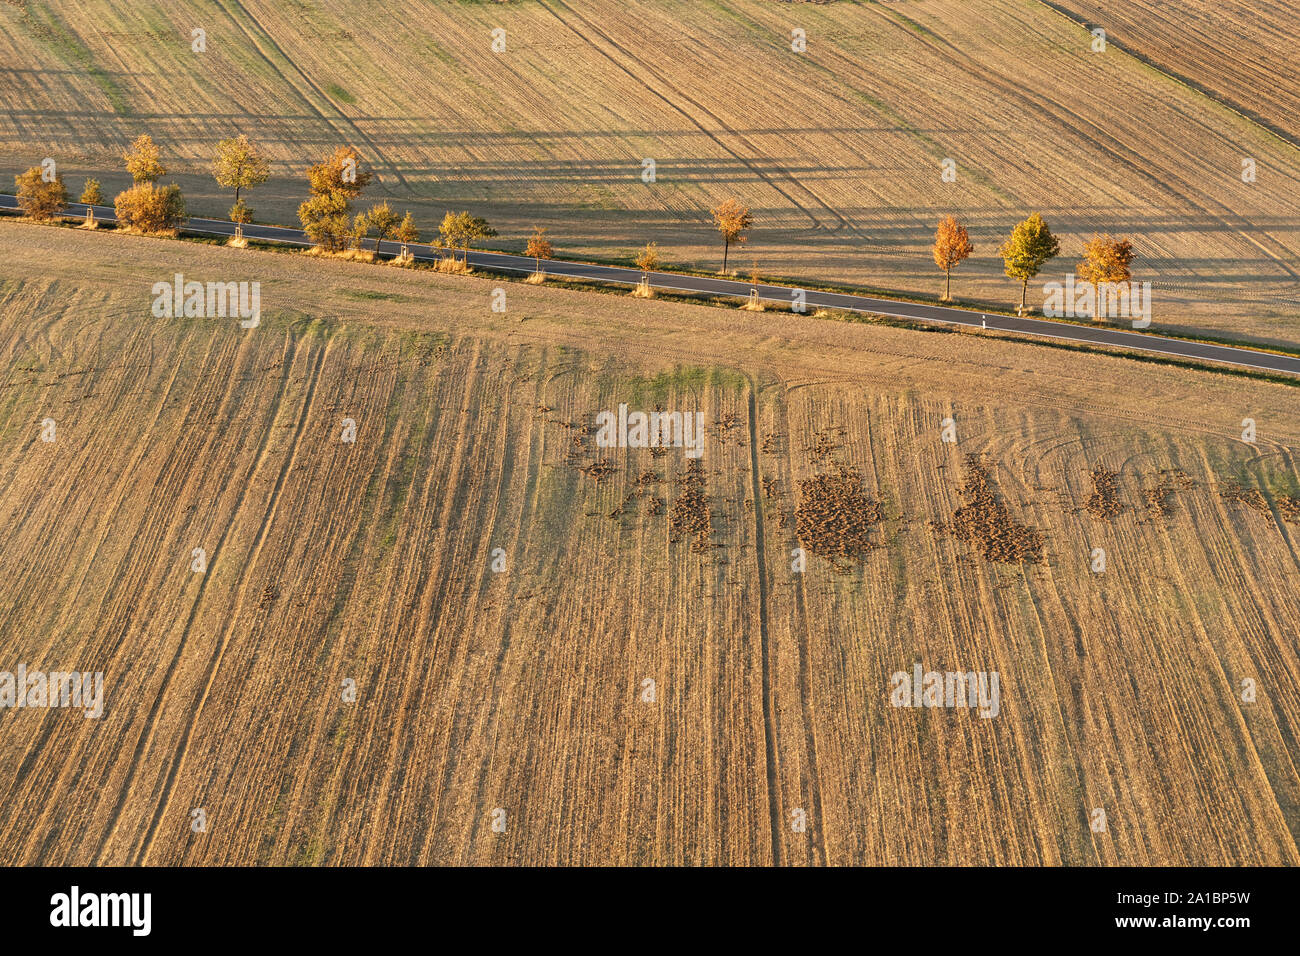 A asphalt road with rows of trees in autumn colors leads over an empty very dry field with traces of agricultural machinery, evening light, trees cast Stock Photo